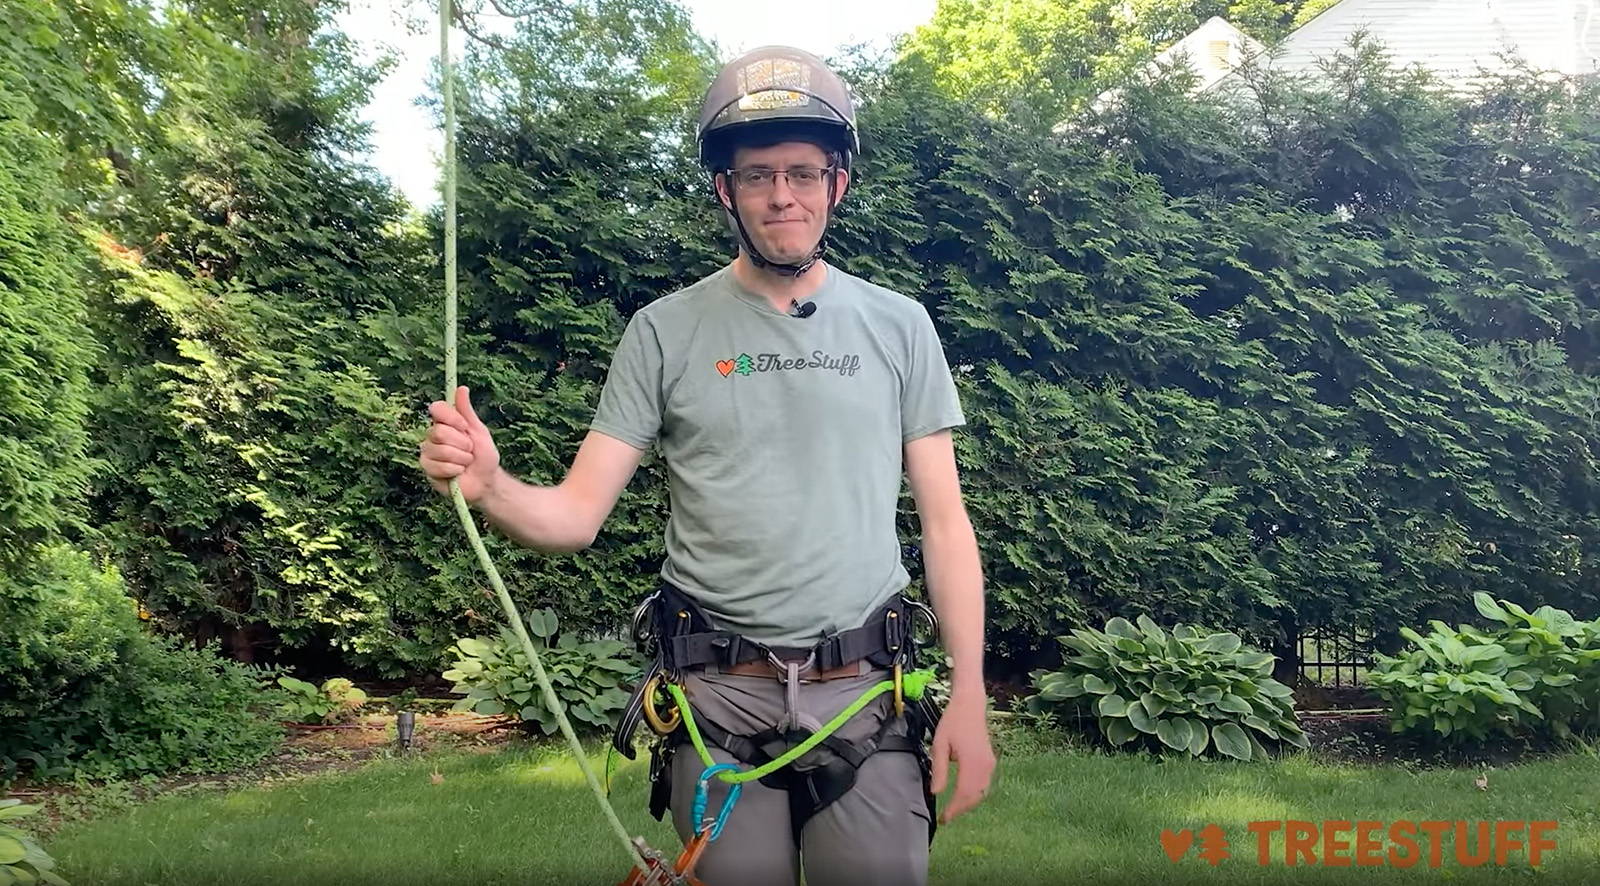 Arborist's Guide to the Best Tree Climbing Harness 